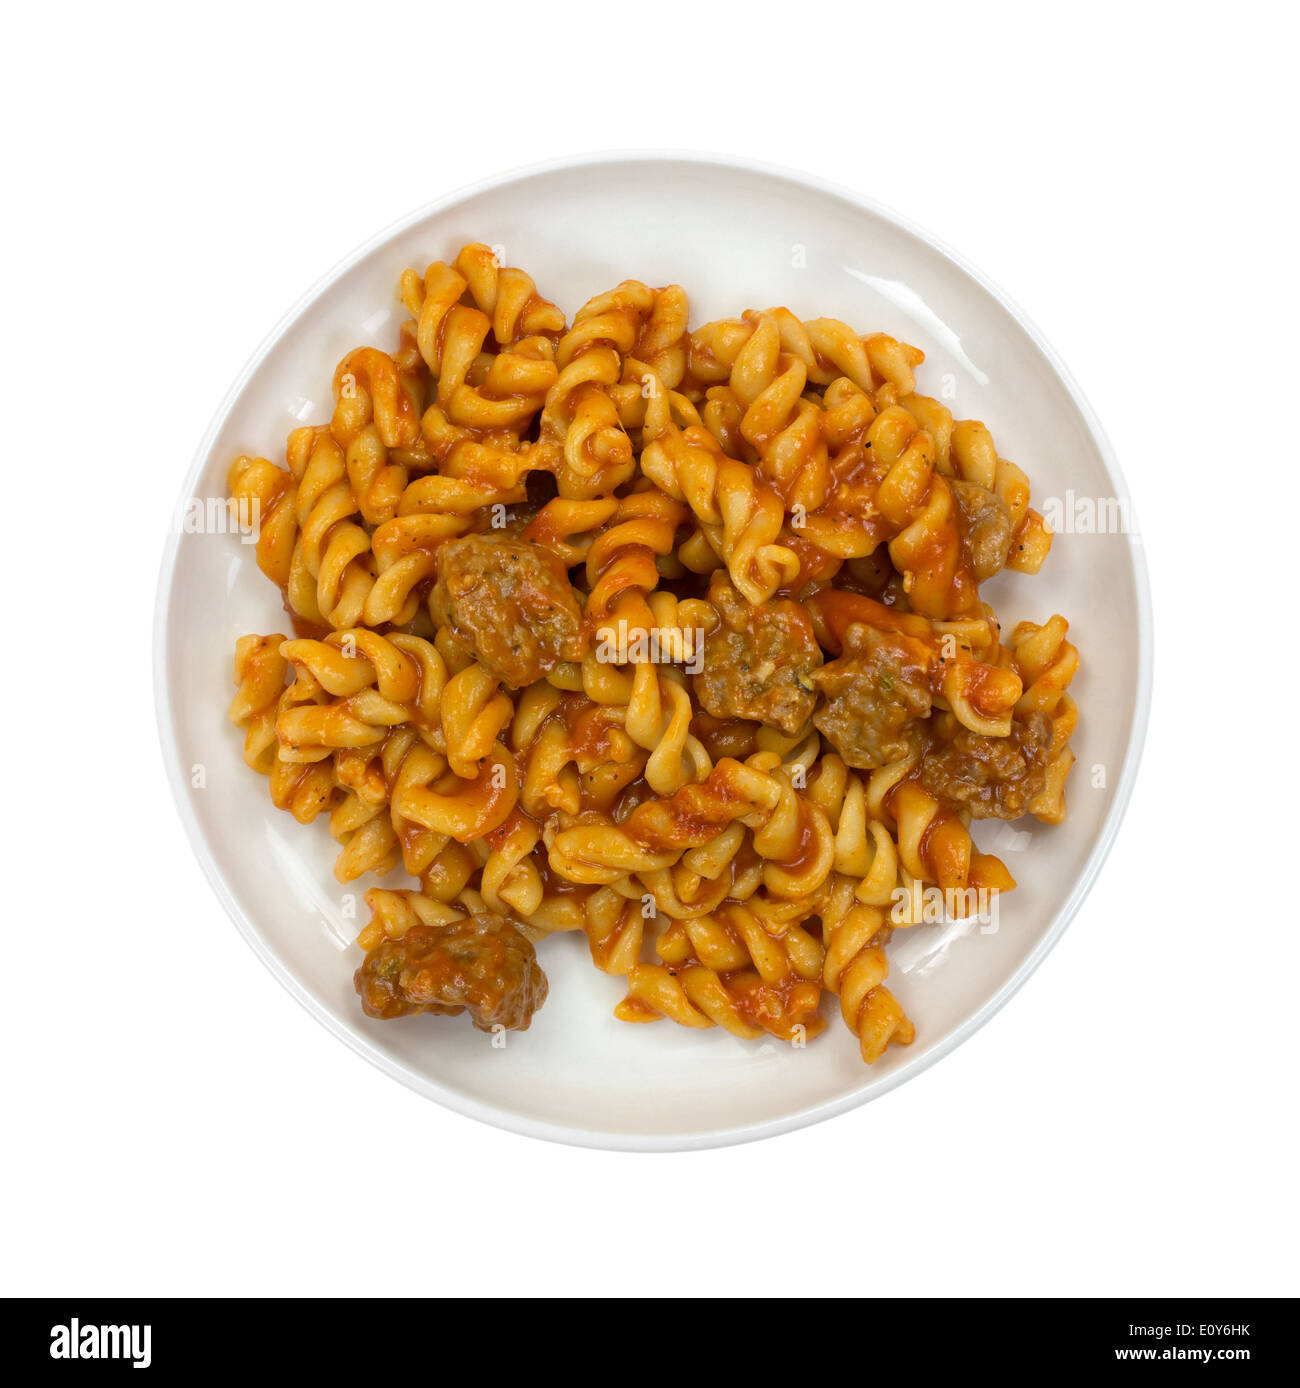 Top view of a serving of spiral pasta in a tomato sauce with small chunks of Italian sausage on a small plate. Stock Photo